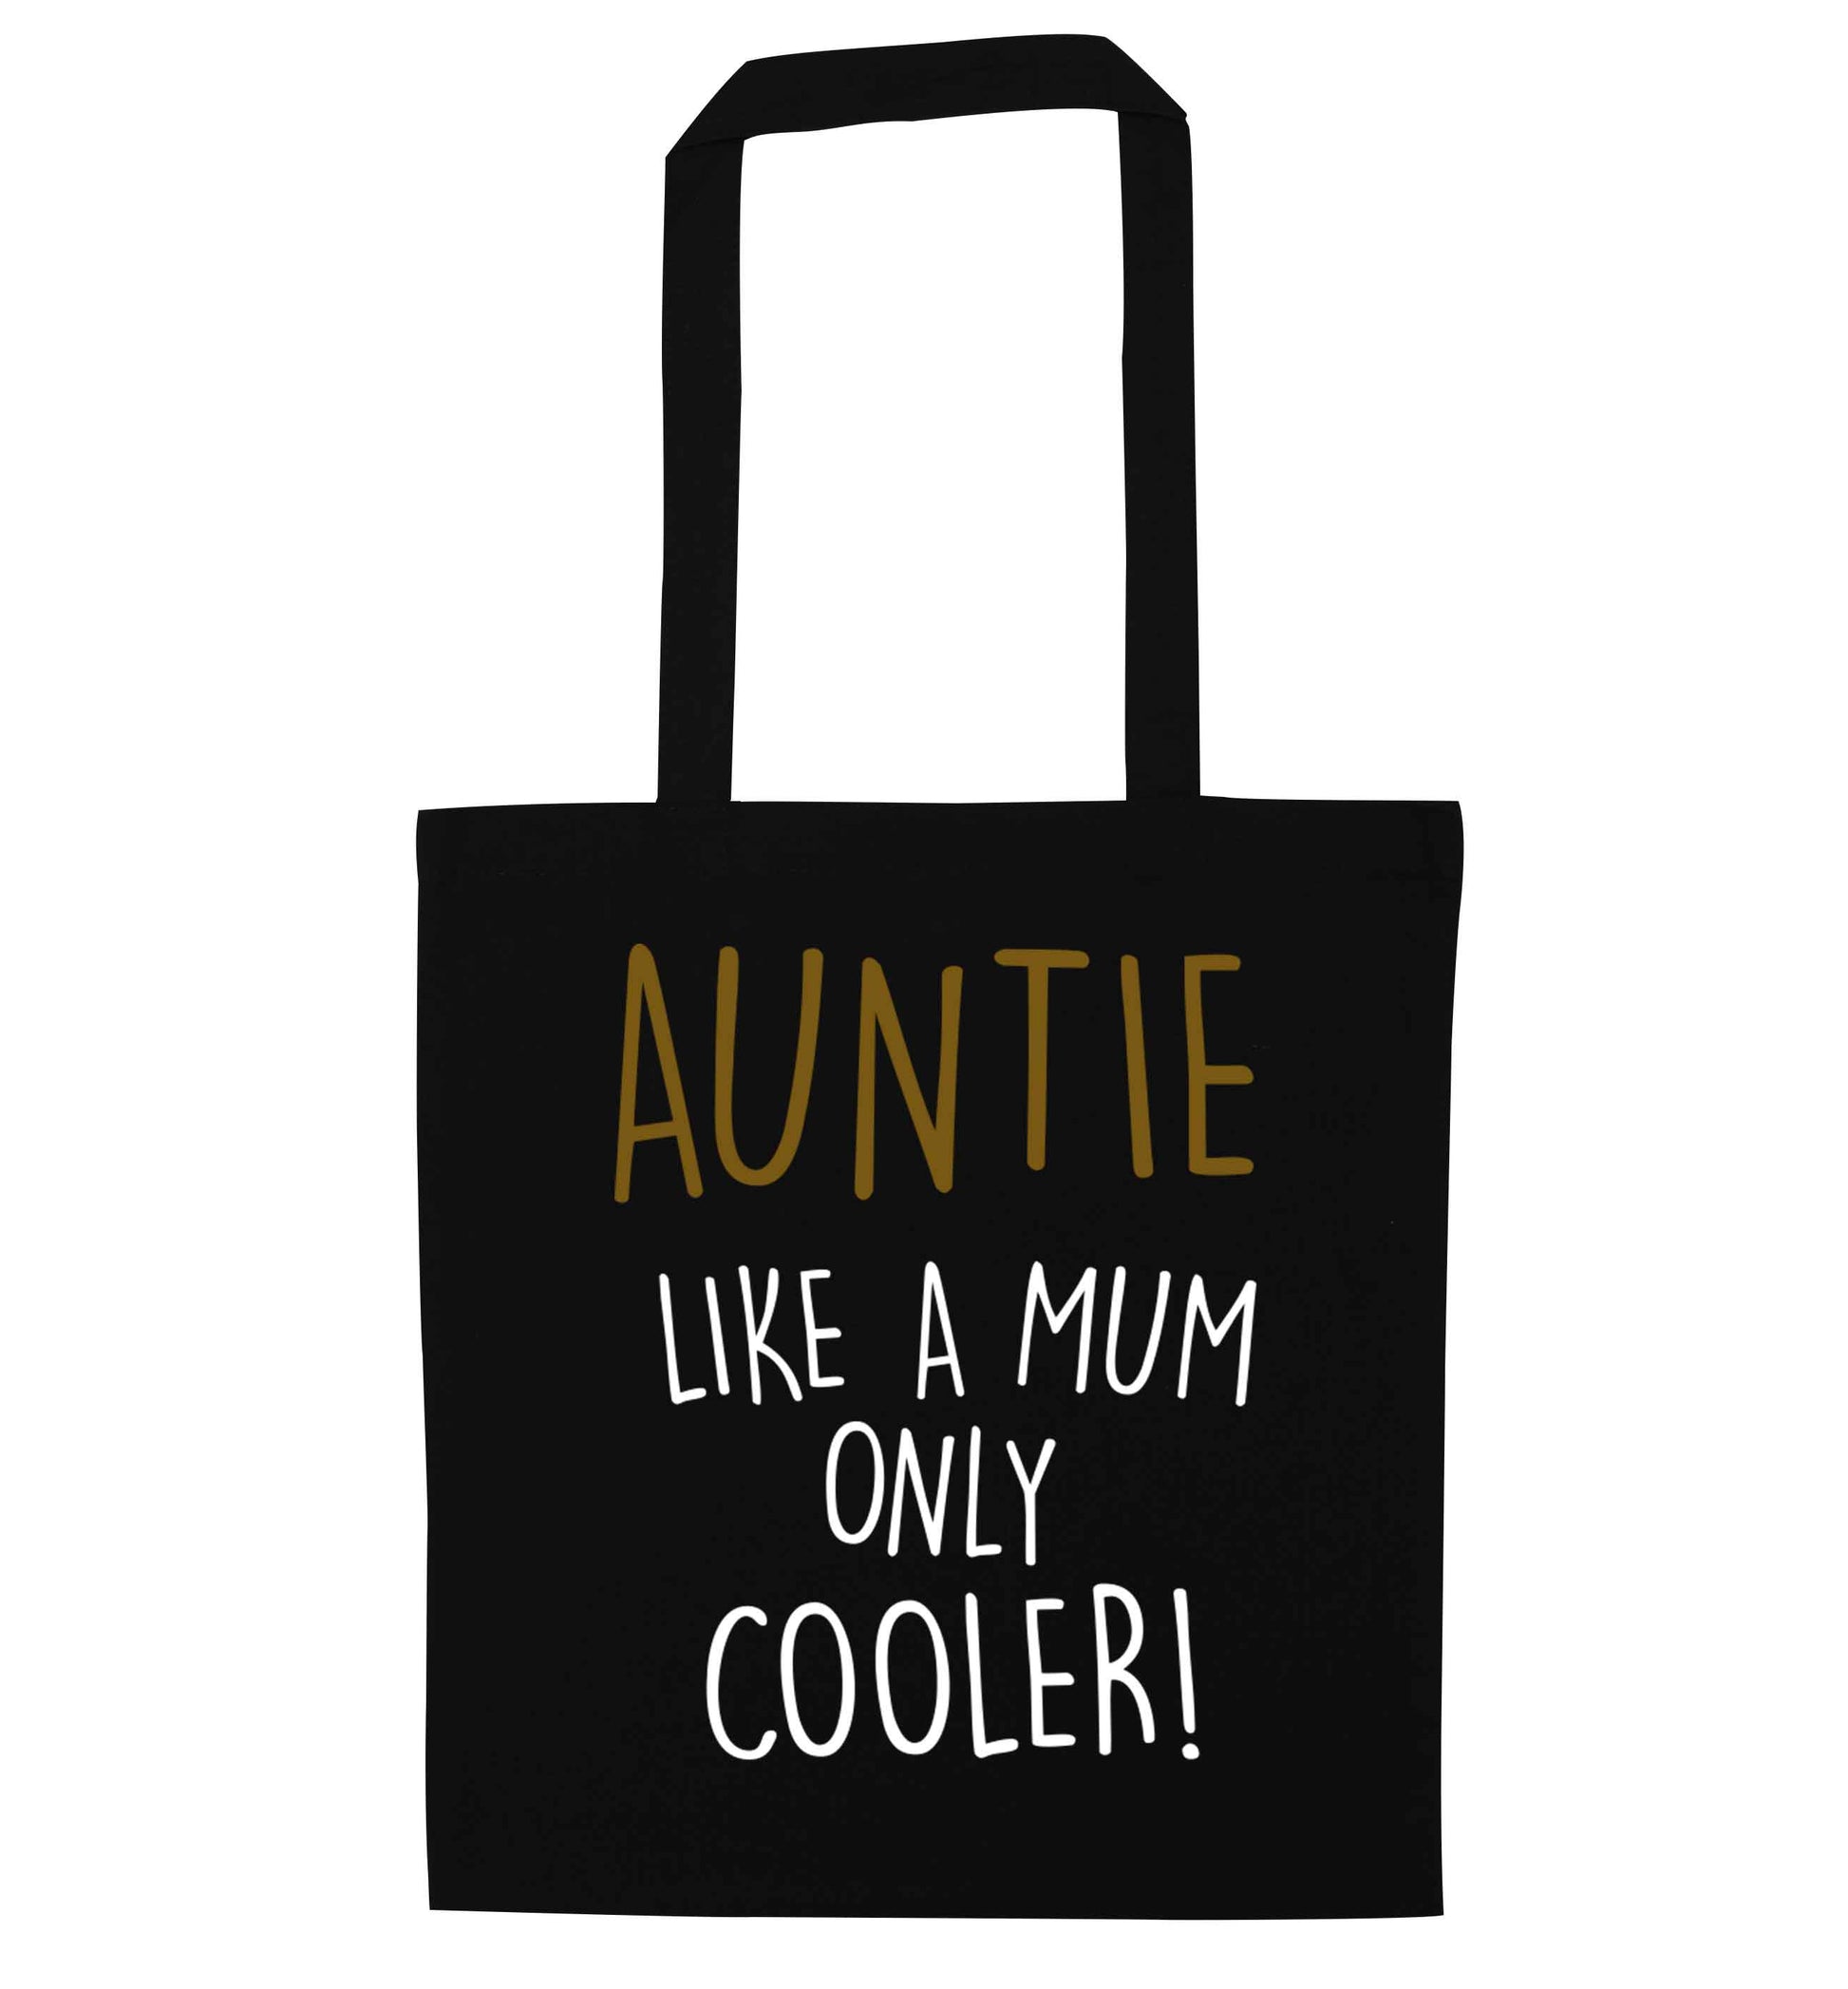 Auntie like a mum only cooler black tote bag